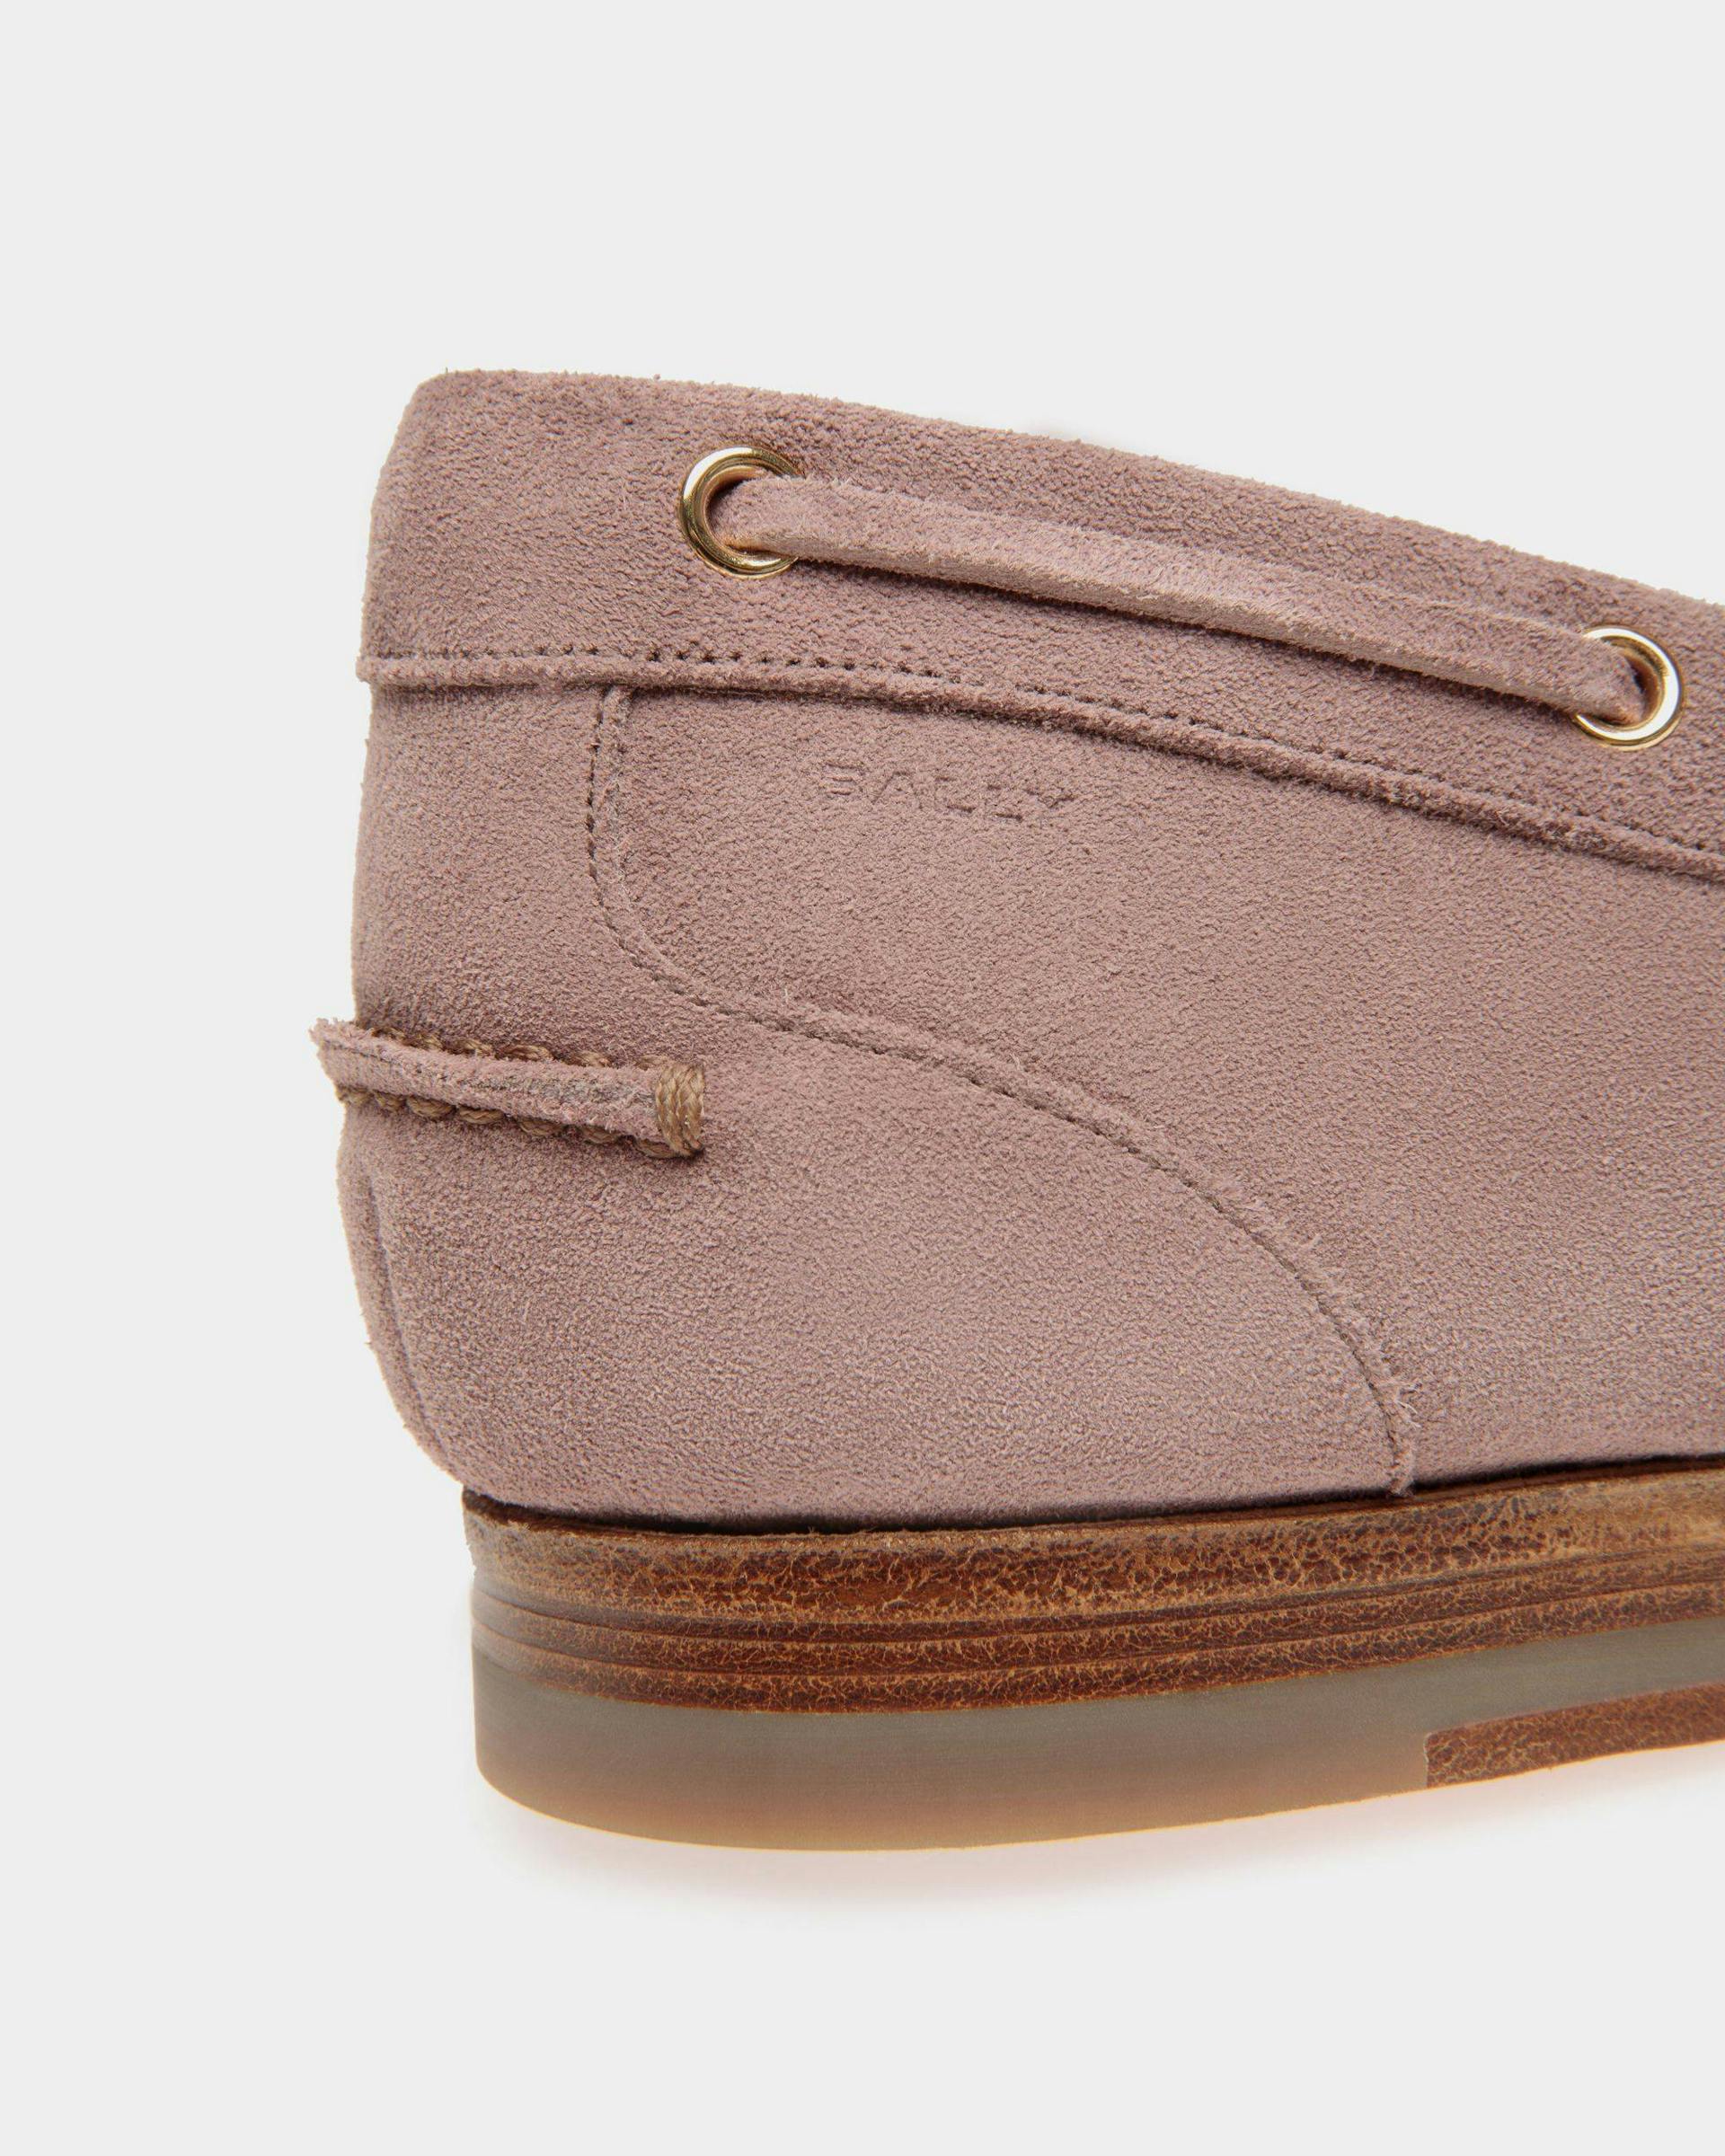 Men's Plume Moccasin in Light Mauve Suede | Bally | Still Life Detail